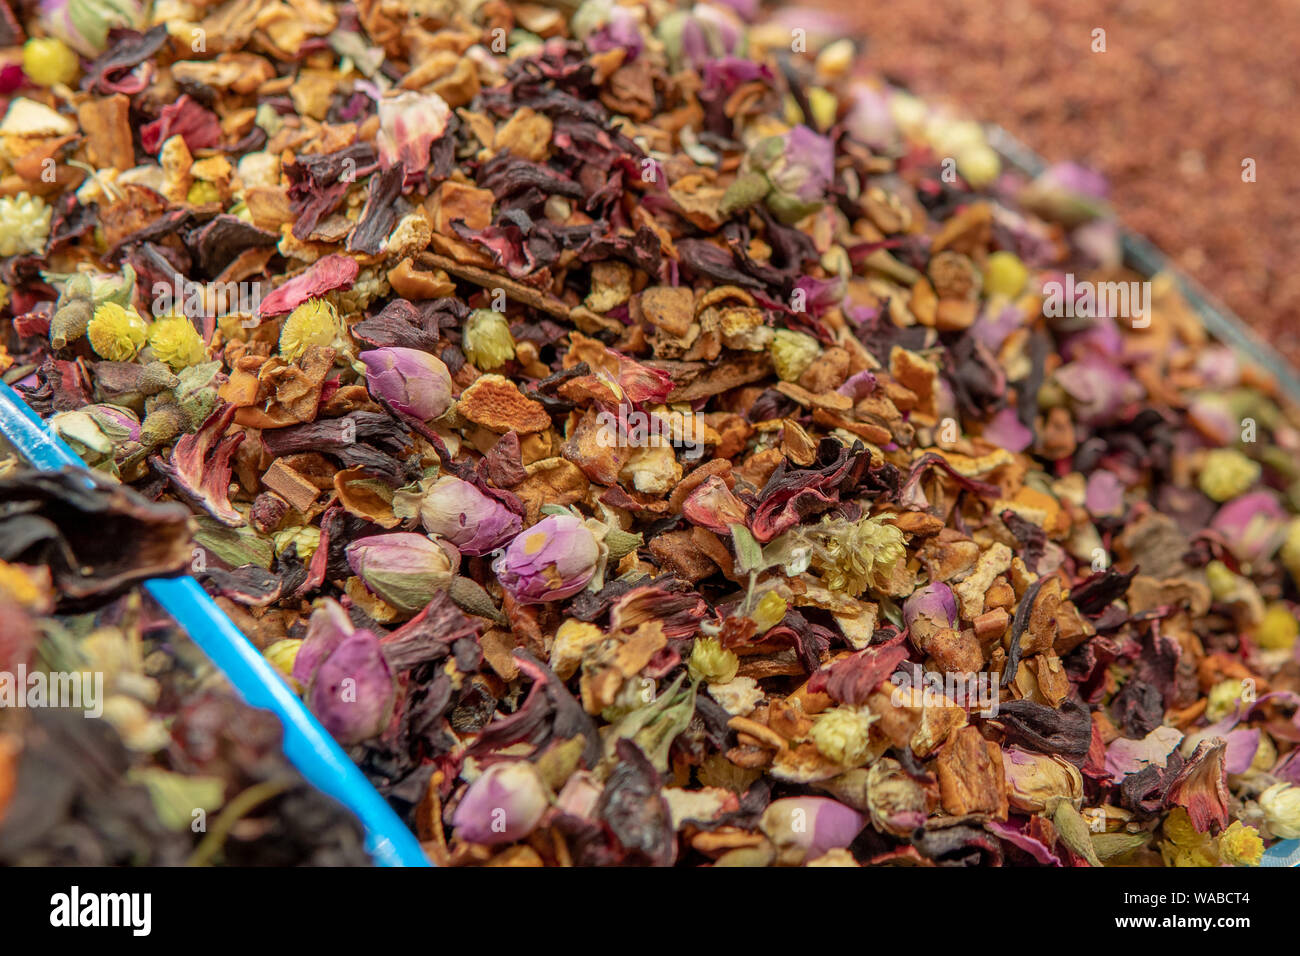 Dried flower dried herbal teas with variety of colors Stock Photo